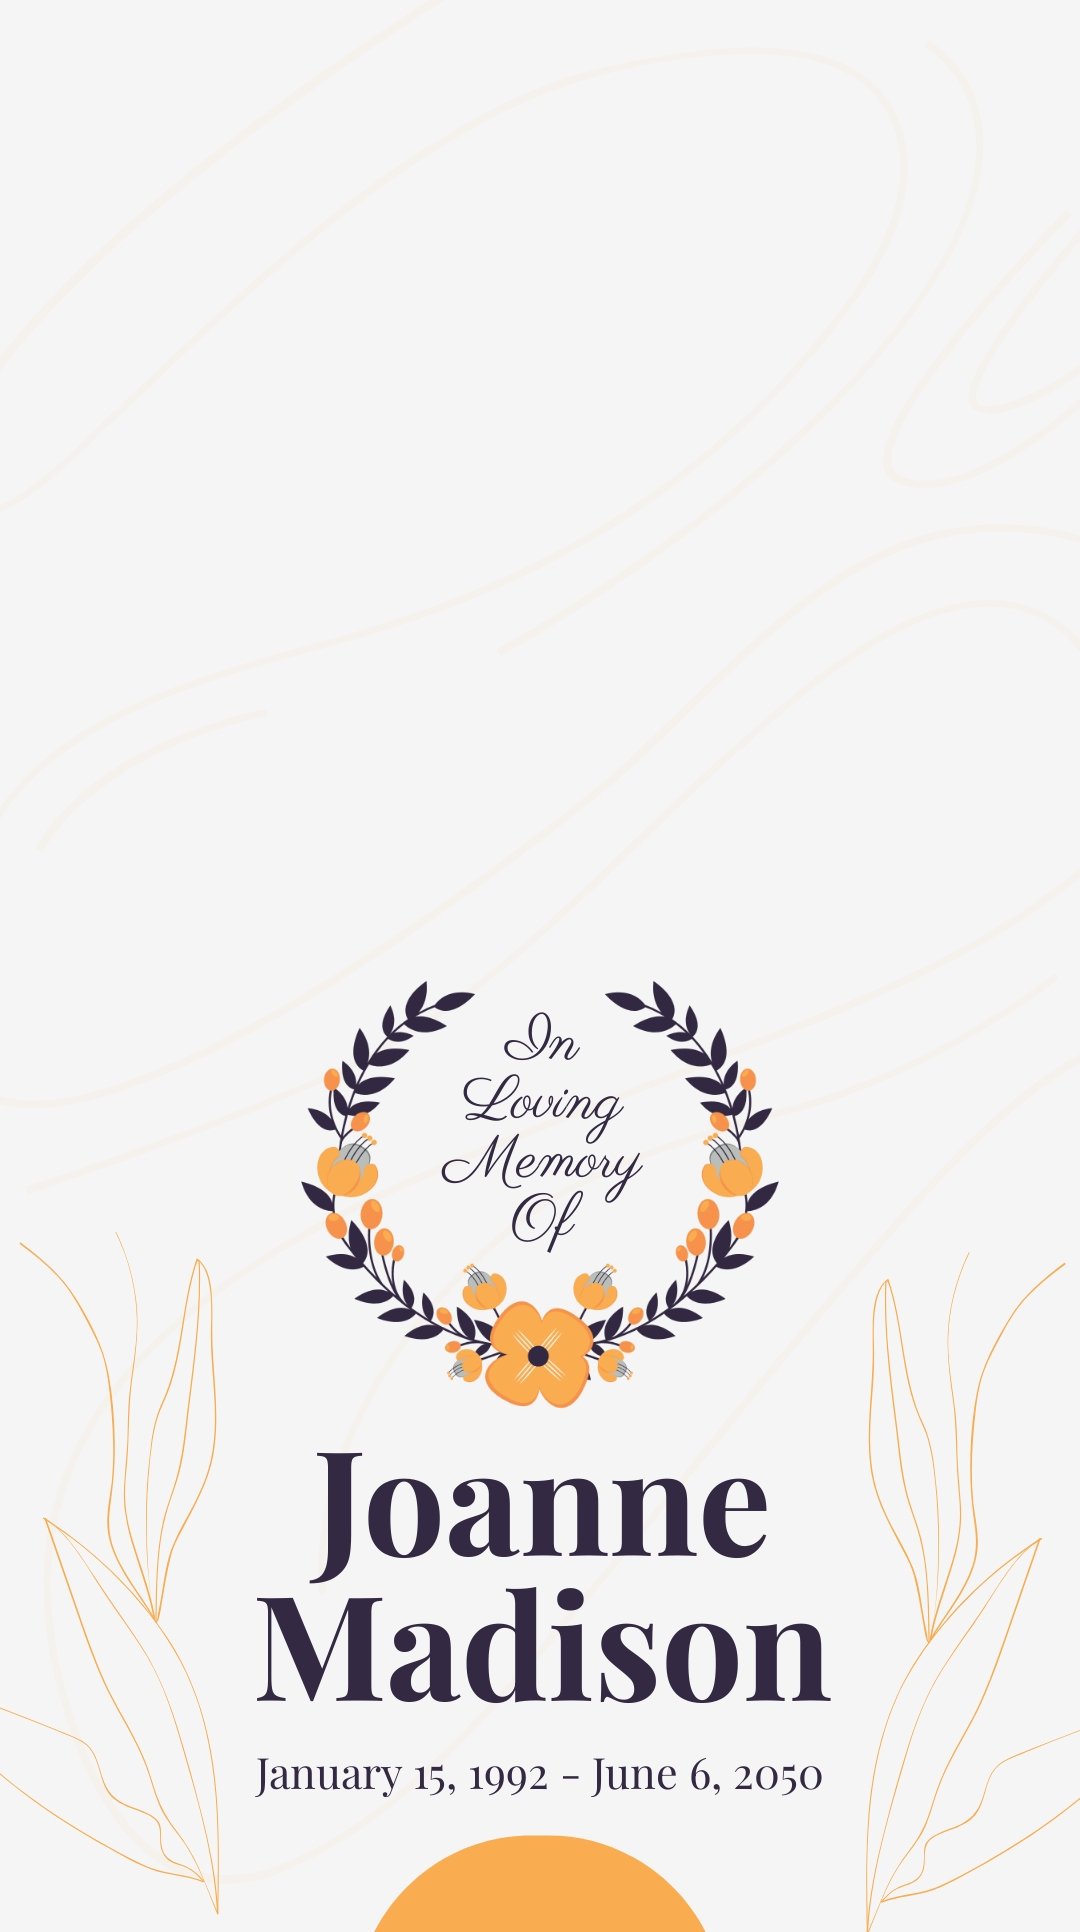 Free In Loving Memory Snapchat Geofilter Template